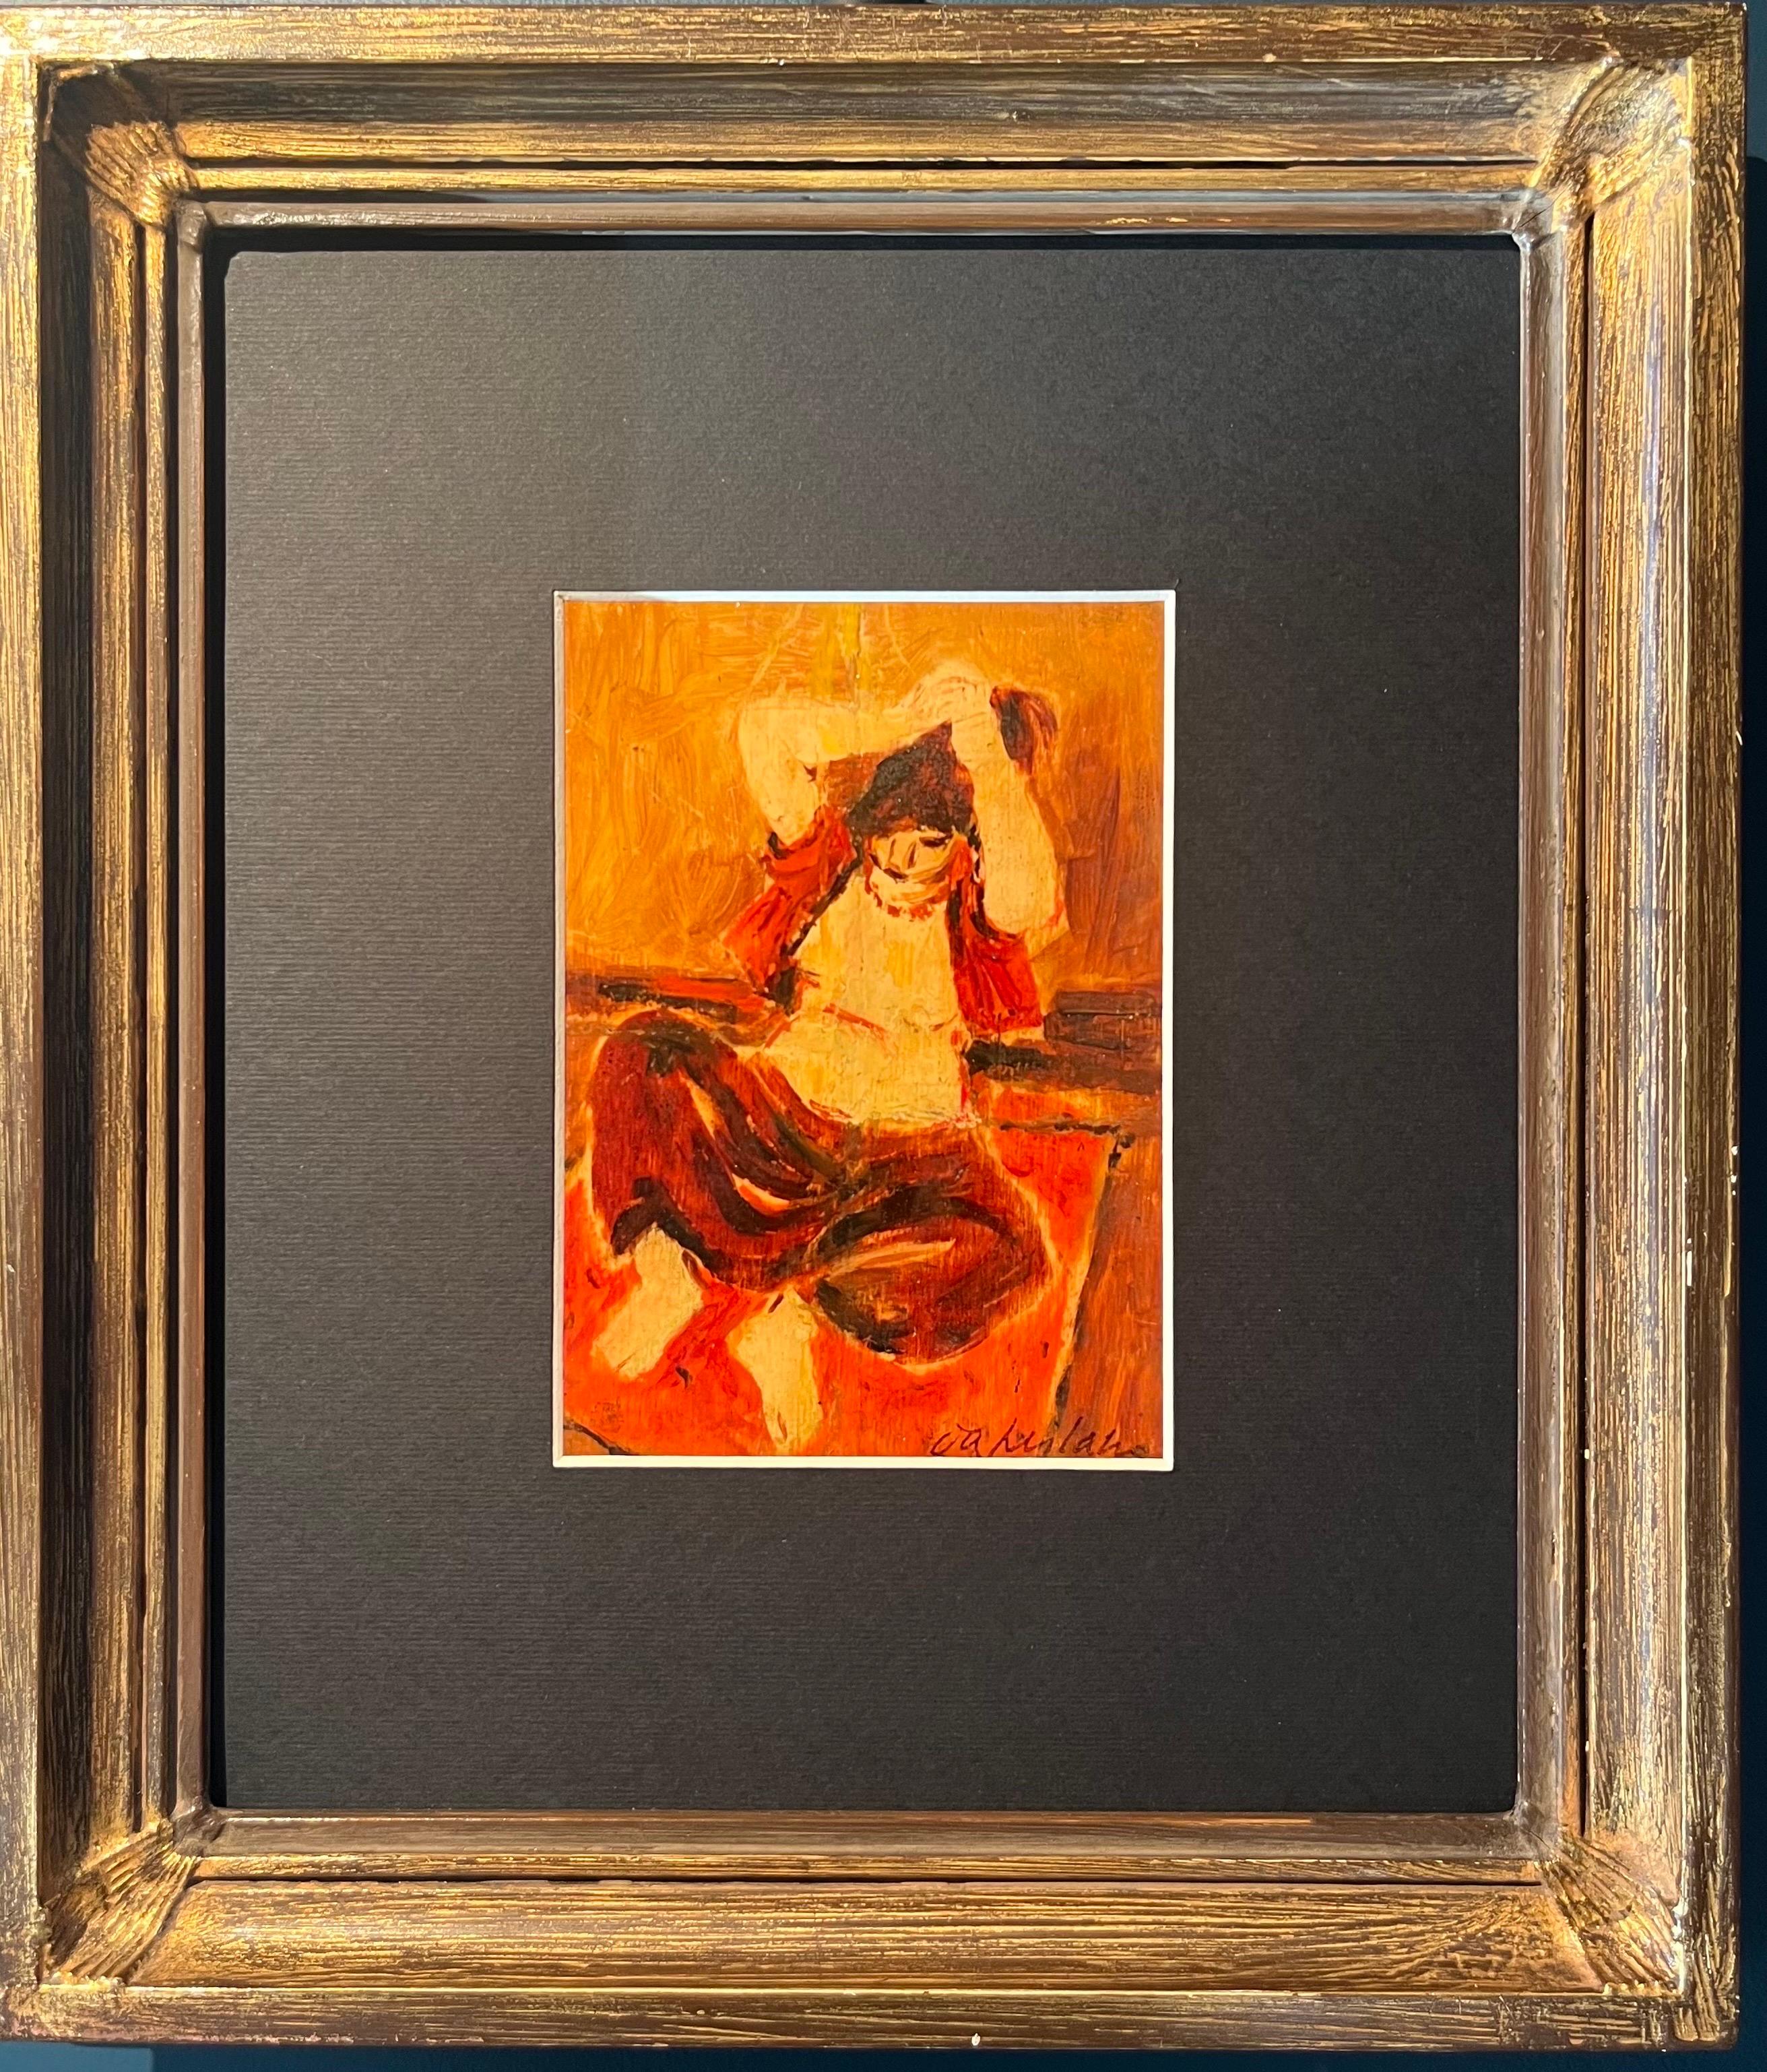 Giulio da Milano Nude Painting - "Red Odalisque" oil cm. 17 x 12 1947  Offer Free Shipping